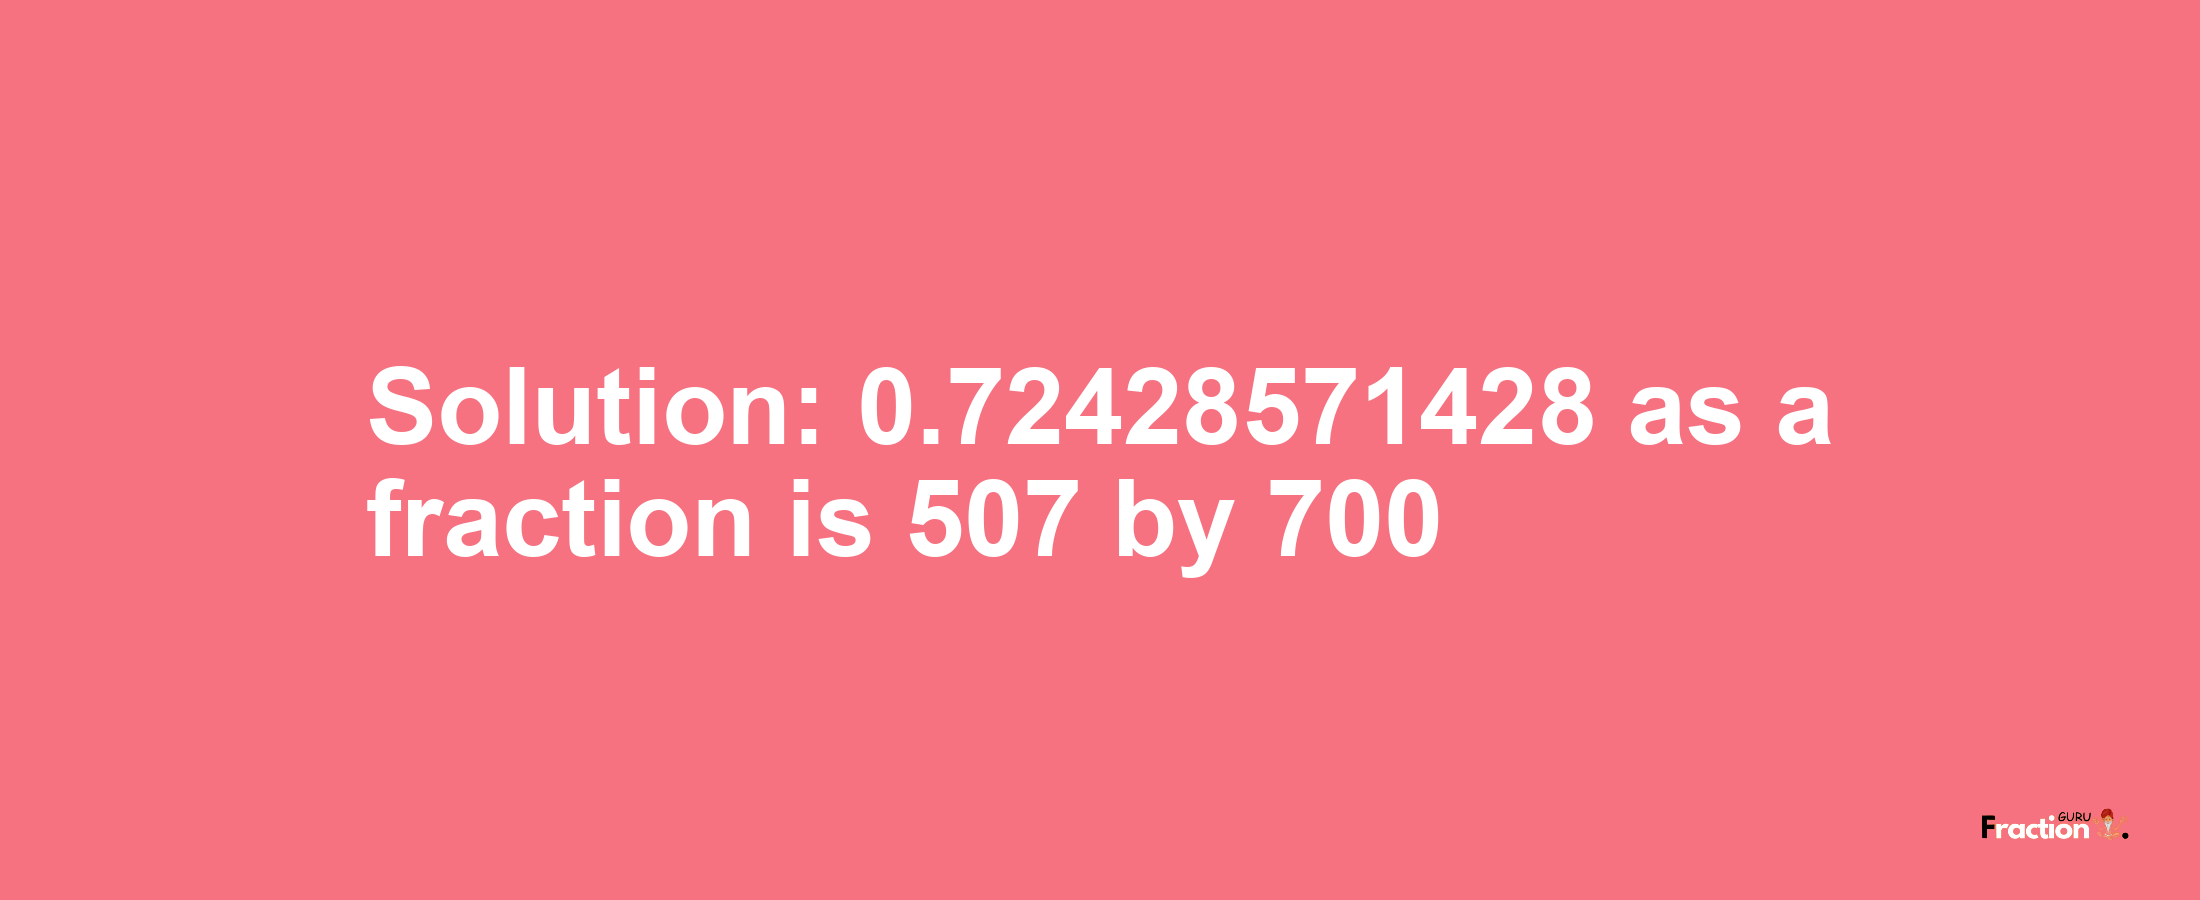 Solution:0.72428571428 as a fraction is 507/700